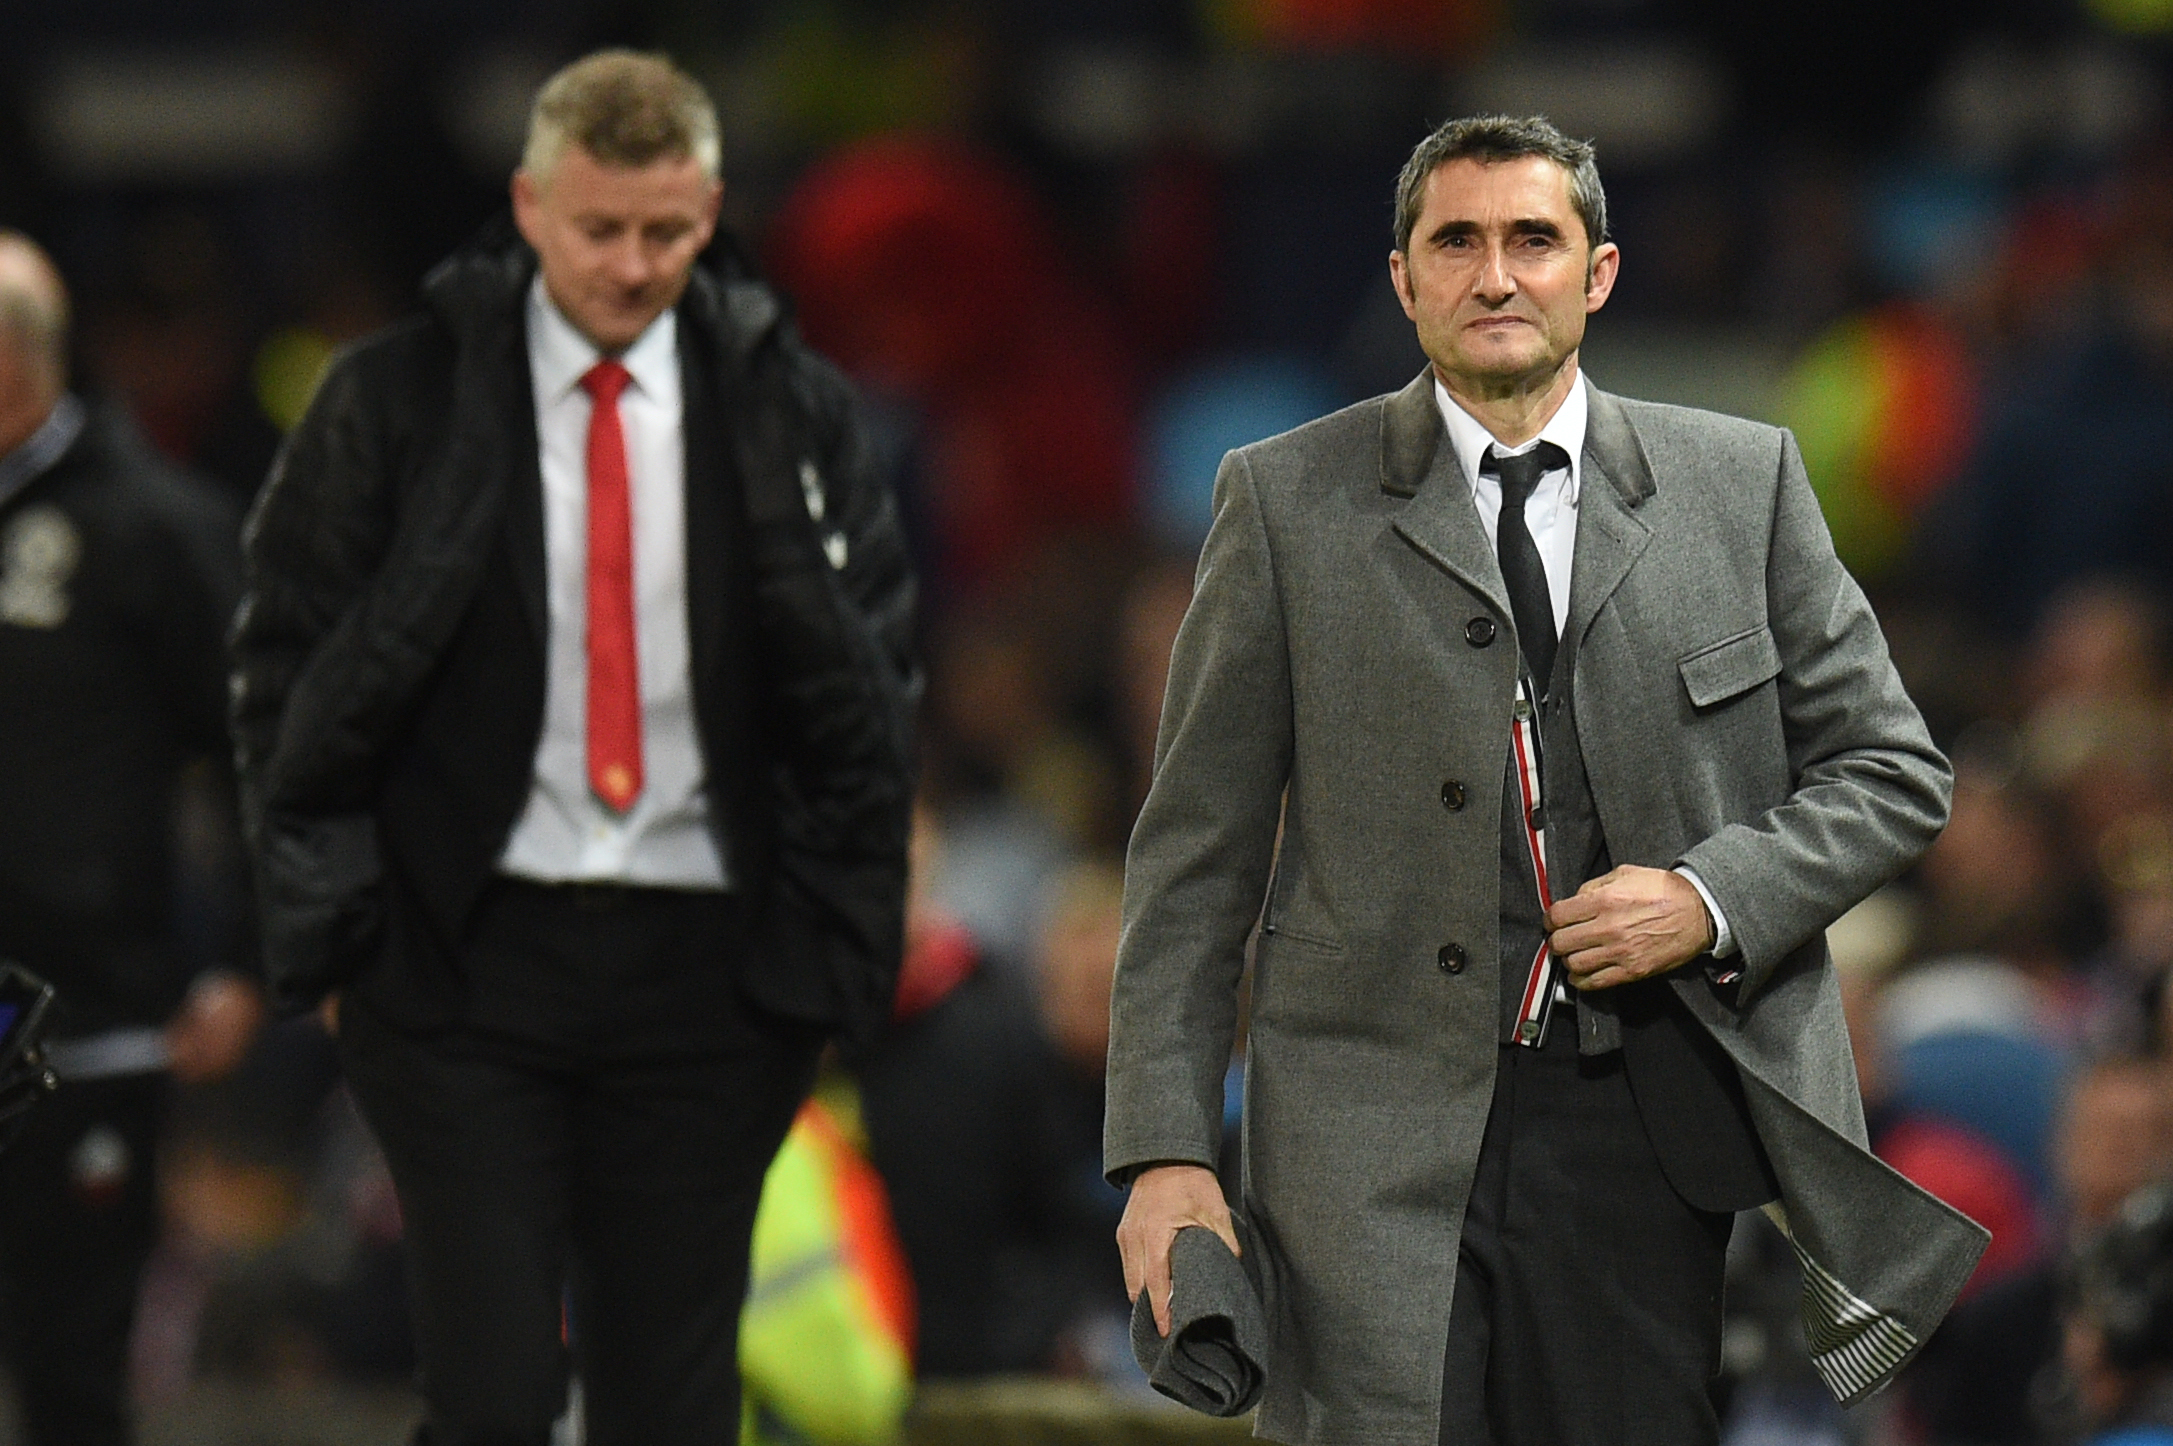 Manchester United's Norwegian manager Ole Gunnar Solskjaer (L) and Barcelona's Spanish coach Ernesto Valverde walk off at half time during the UEFA Champions league first leg quarter-final football match between Manchester United and Barcelona at Old Trafford in Manchester, north west England, on April 10, 2019. (Photo by Oli SCARFF / AFP)        (Photo credit should read OLI SCARFF/AFP/Getty Images)